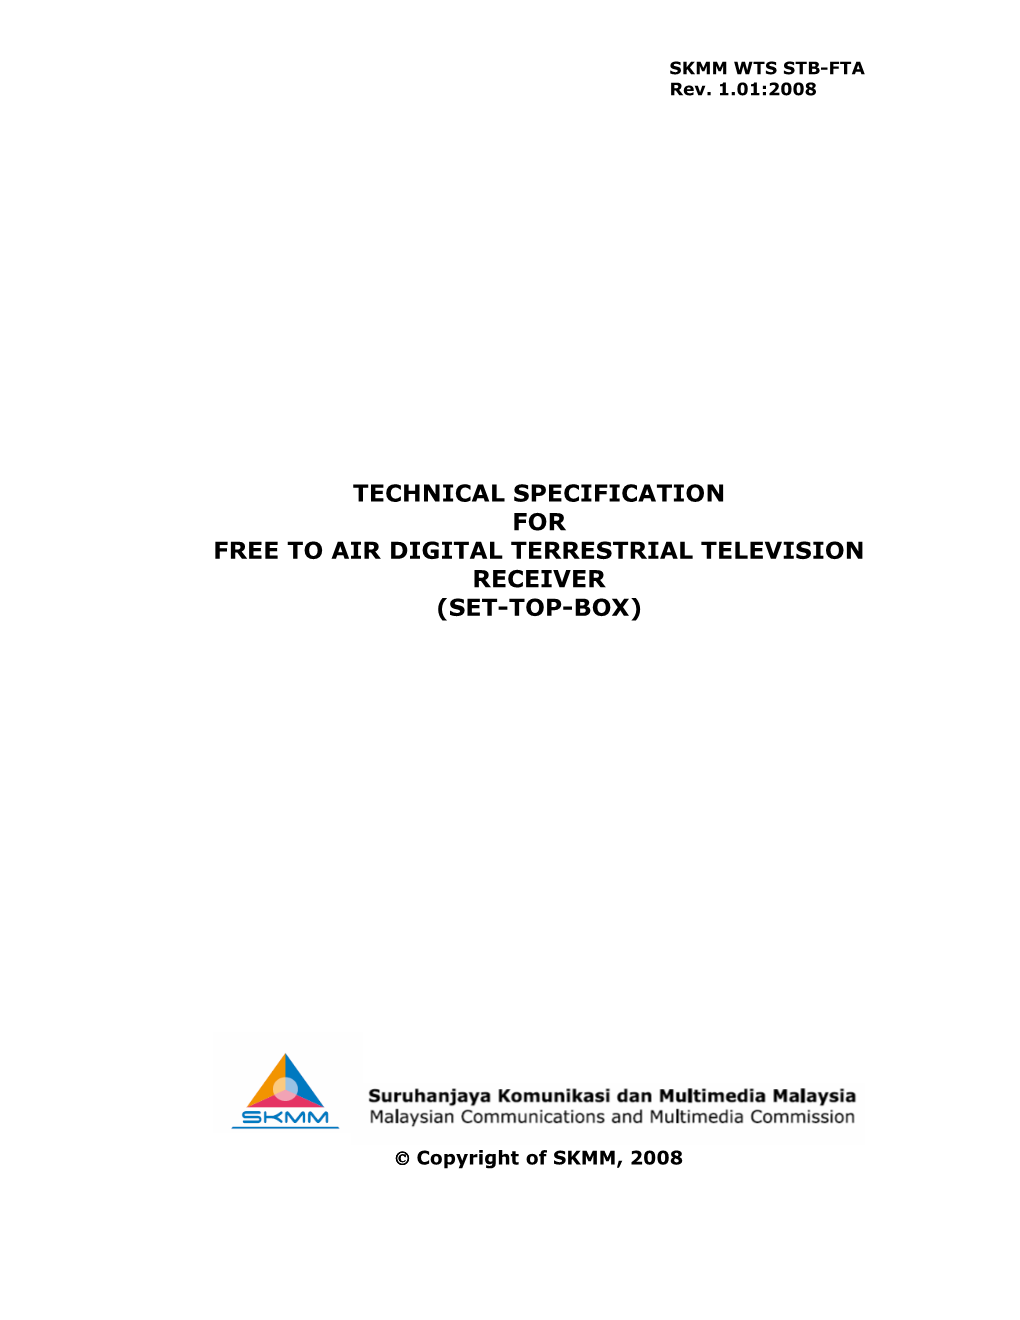 Technical Specification for Free to Air Digital Terrestrial Television Receiver (Set-Top-Box)